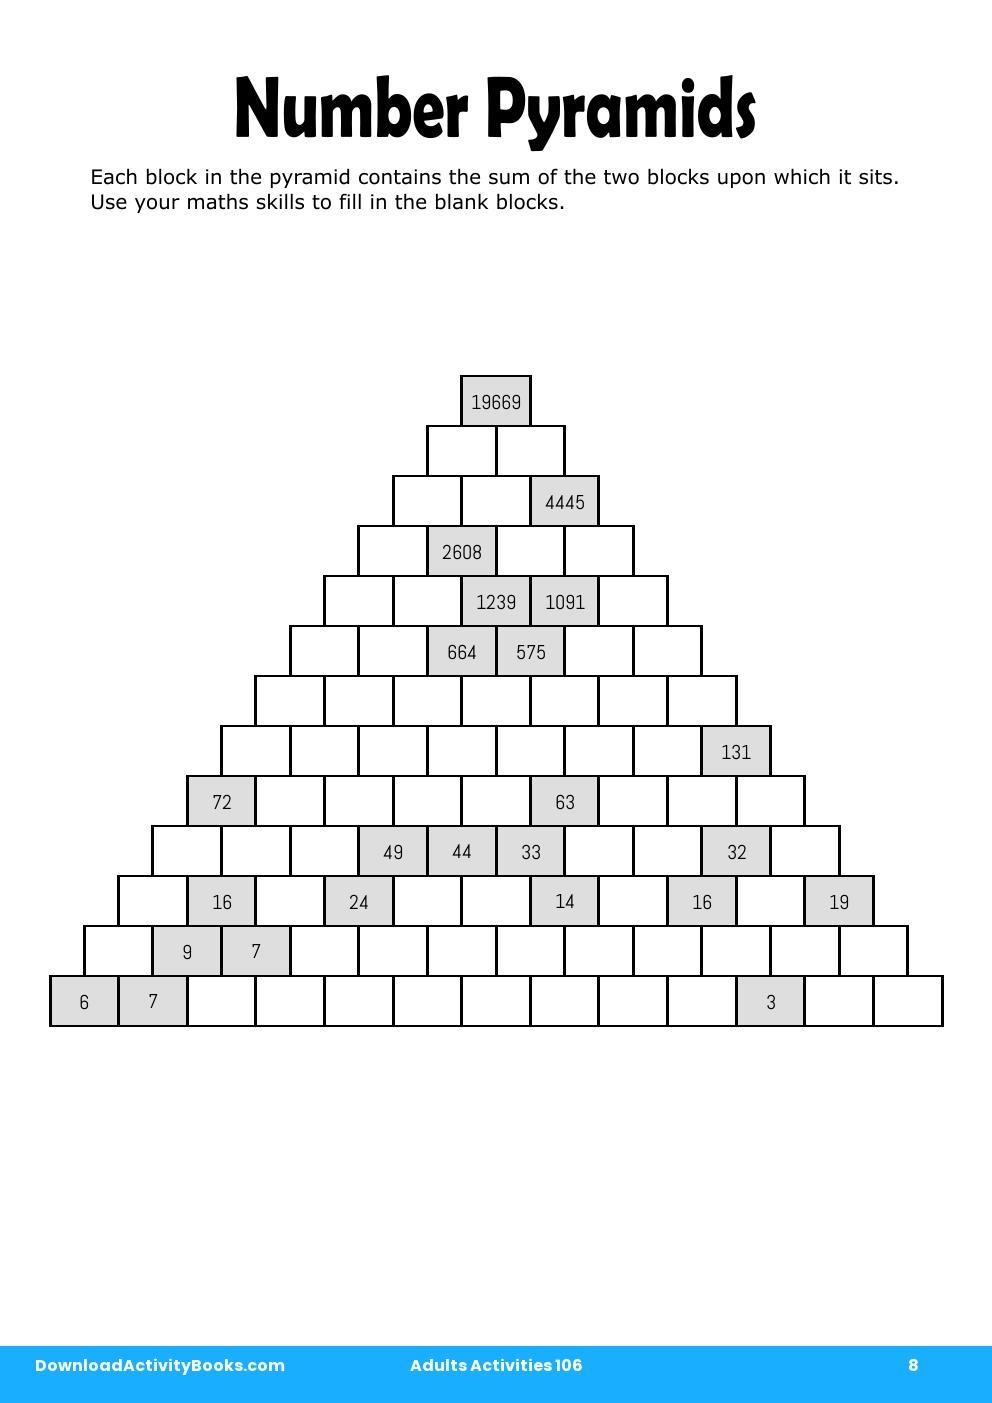 Number Pyramids in Adults Activities 106